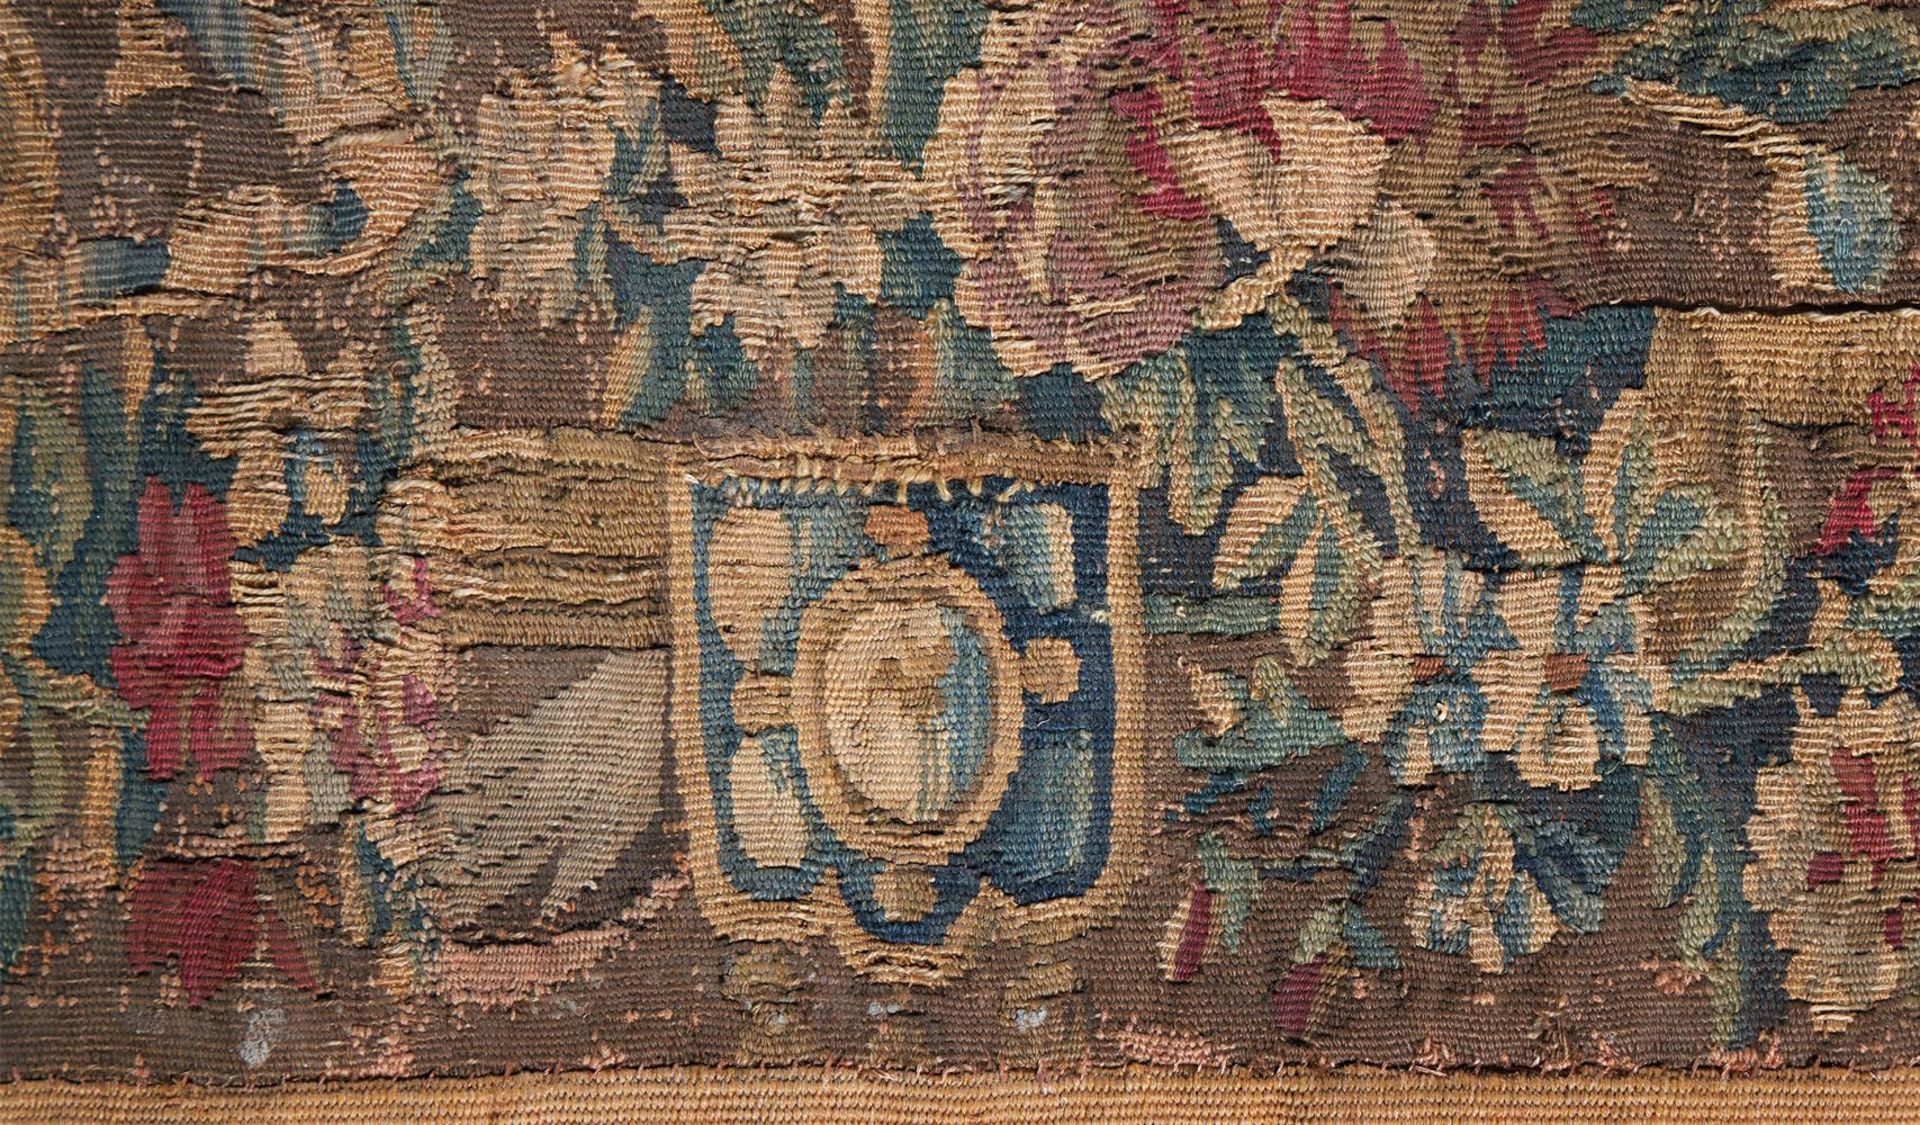 A FRENCH VERDURE TAPESTRY, EARLY 18TH CENTURY - Image 5 of 5